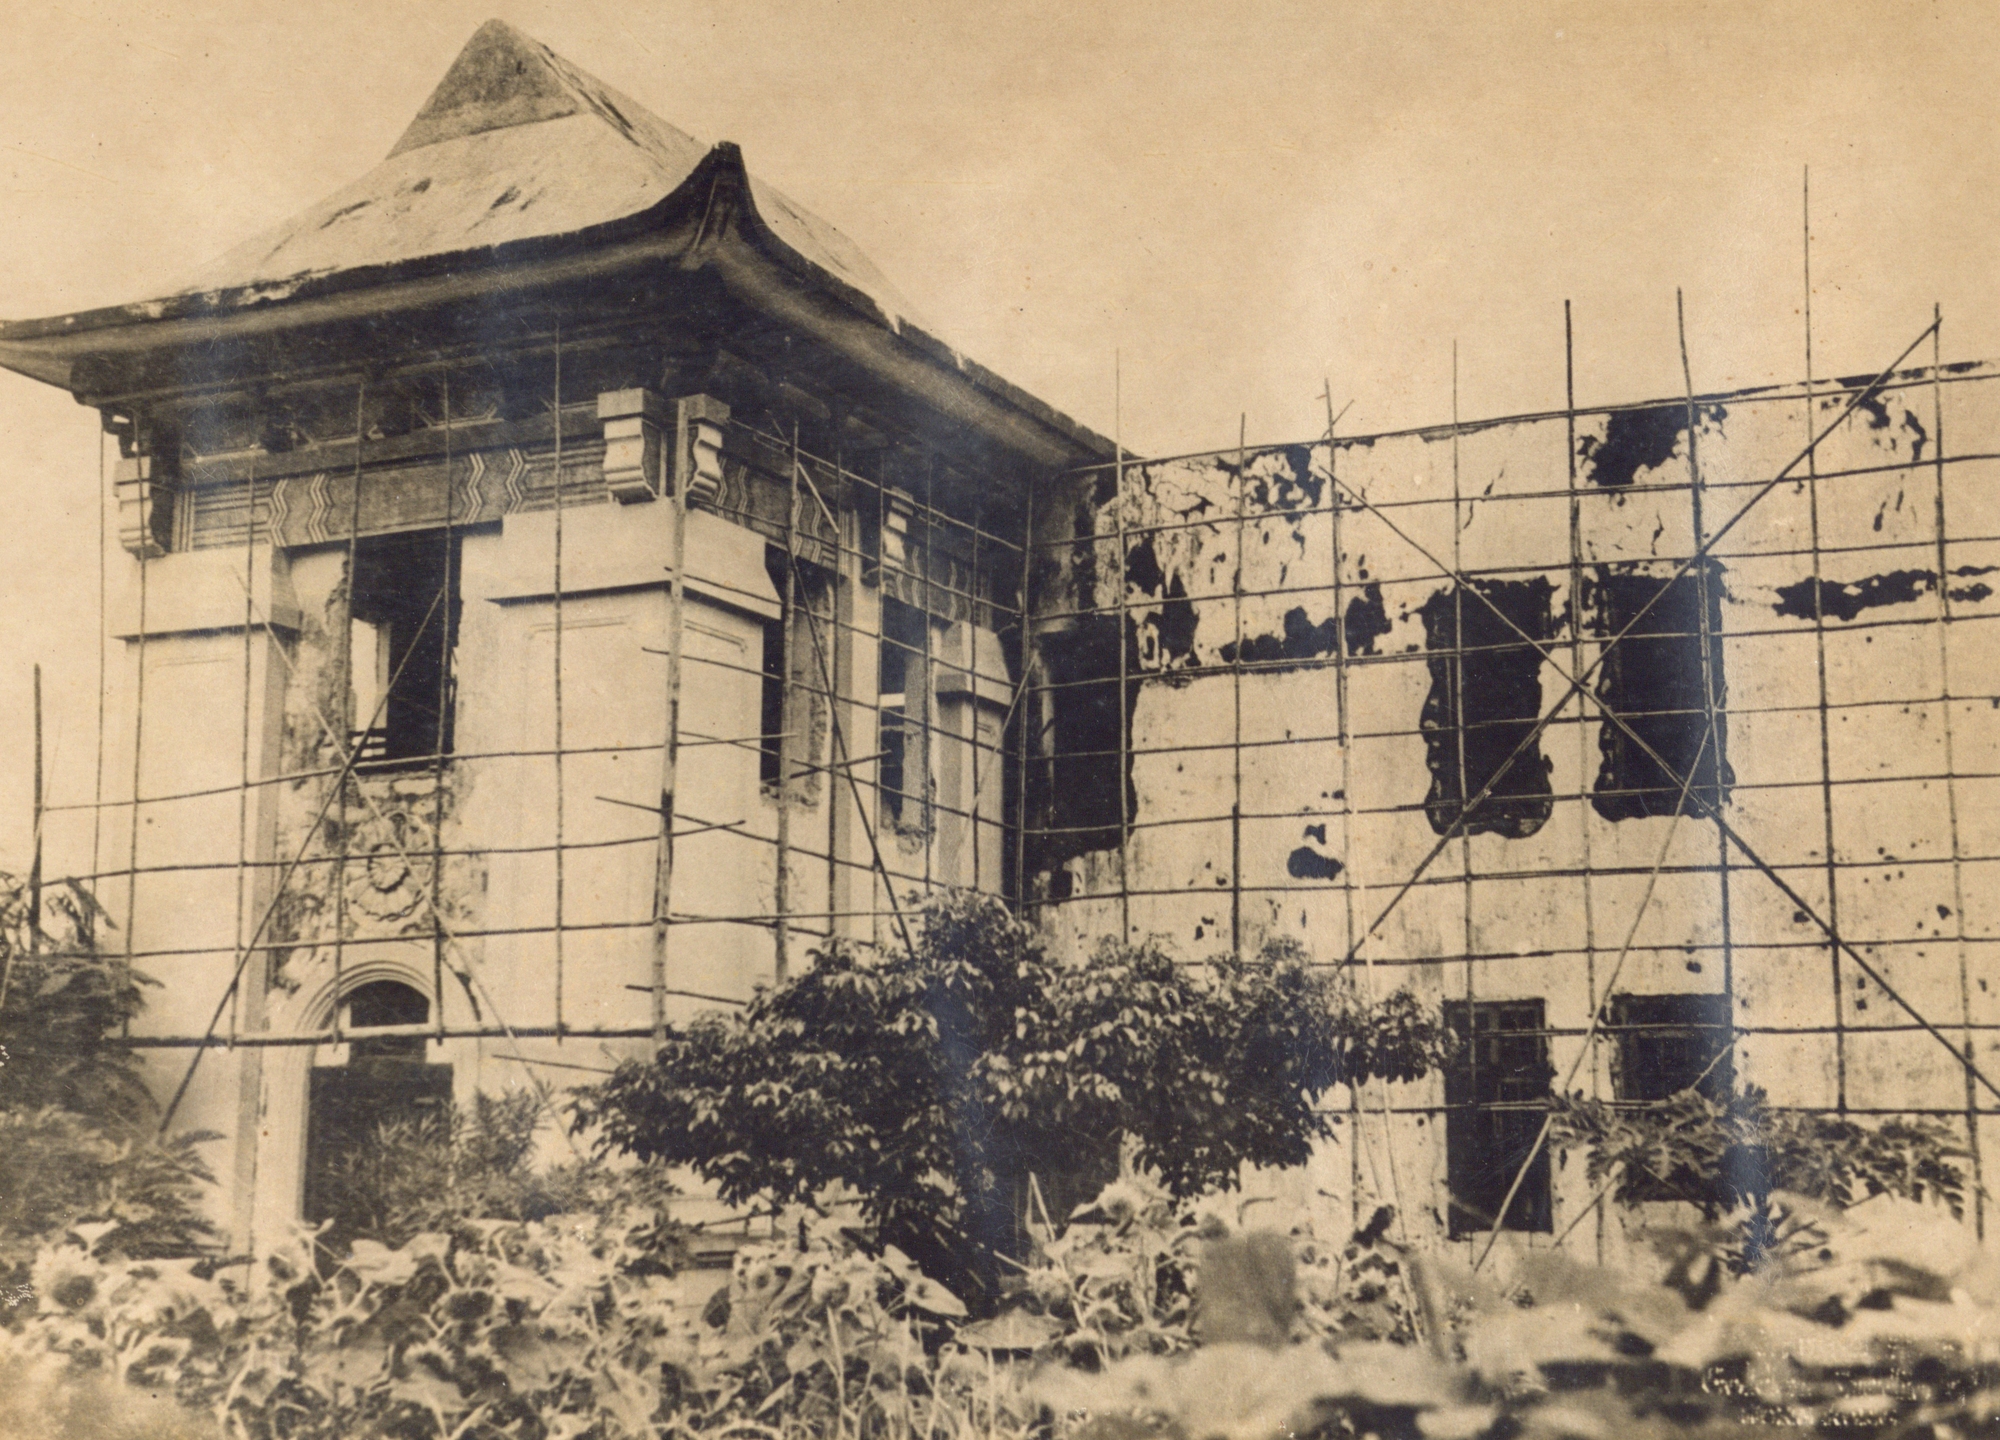 Reception hall, scripture library and living quarters under repair after Japanese Occupation 1945